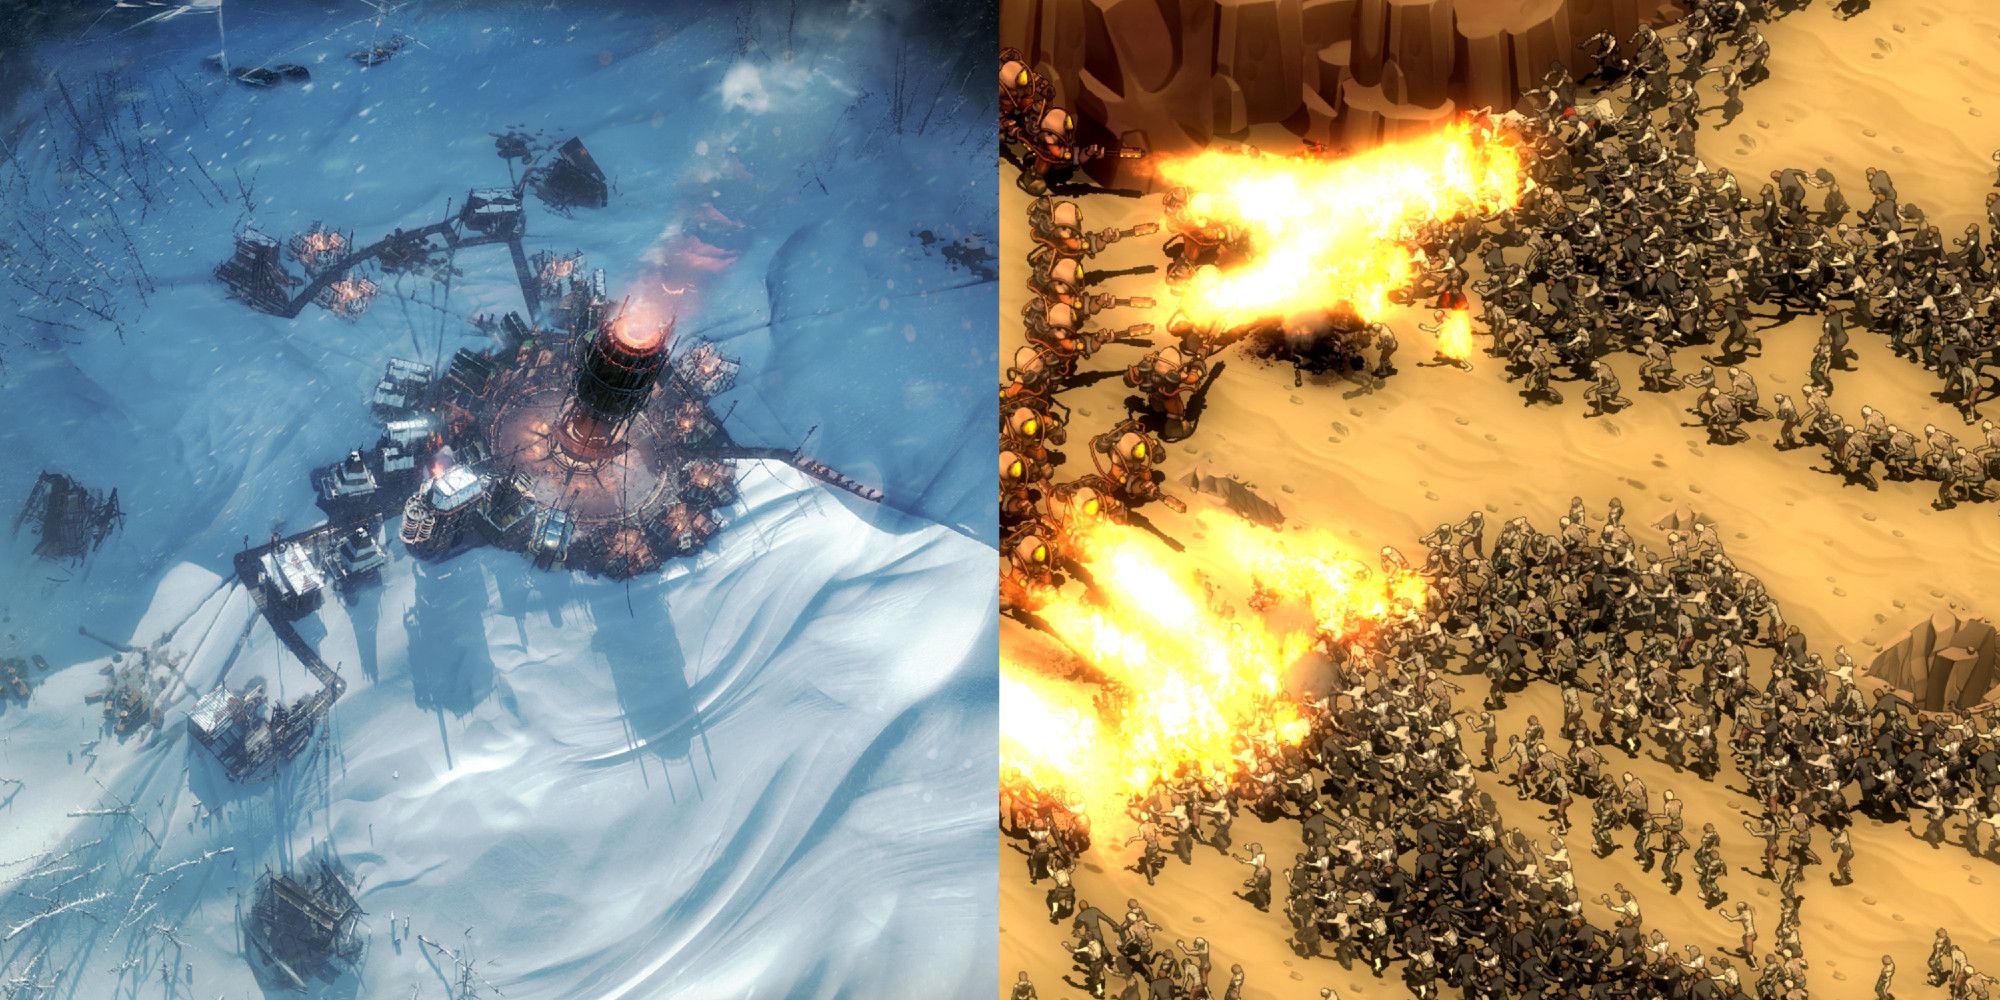 Side by side screenshots from Frostpunk and They Are Billions